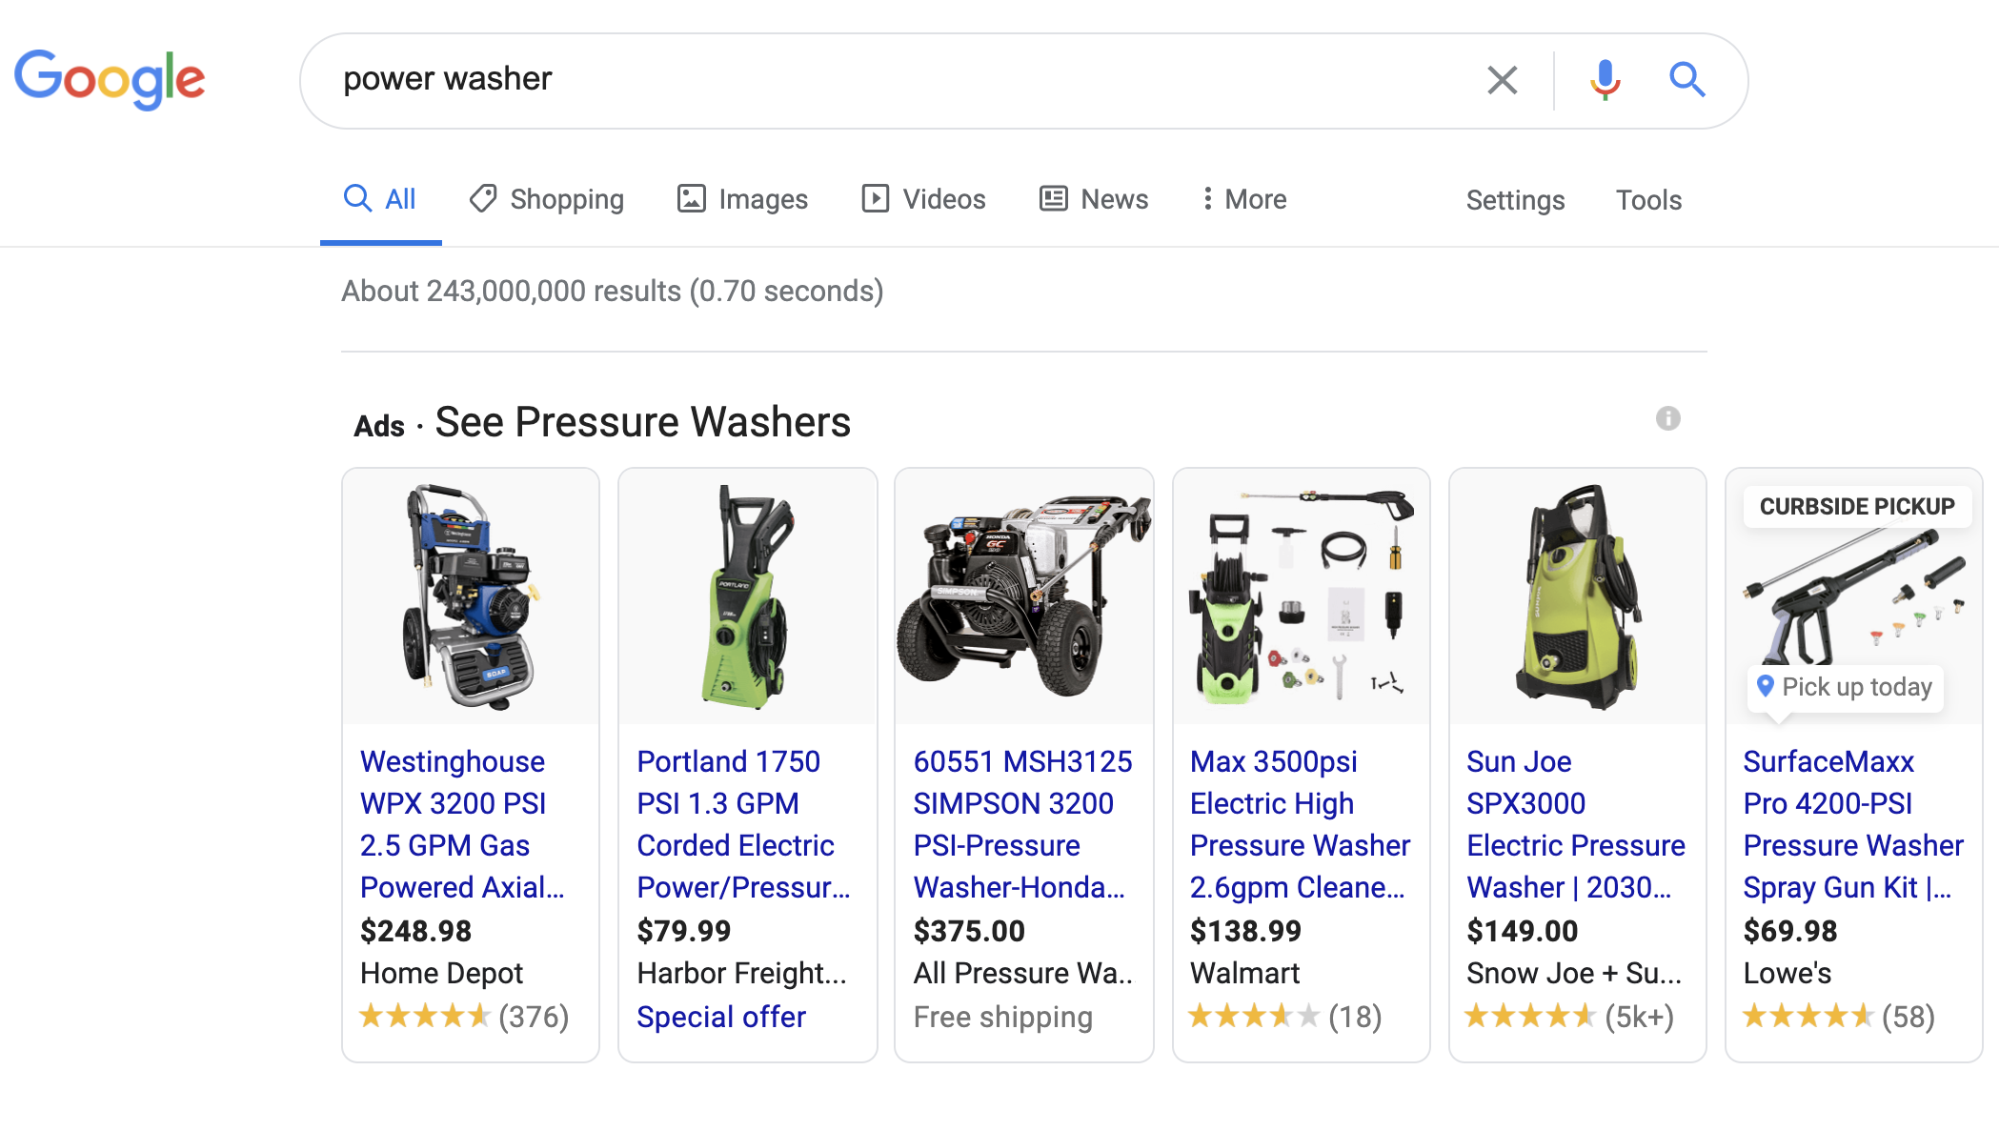 Google search results displaying ads for different power washers.